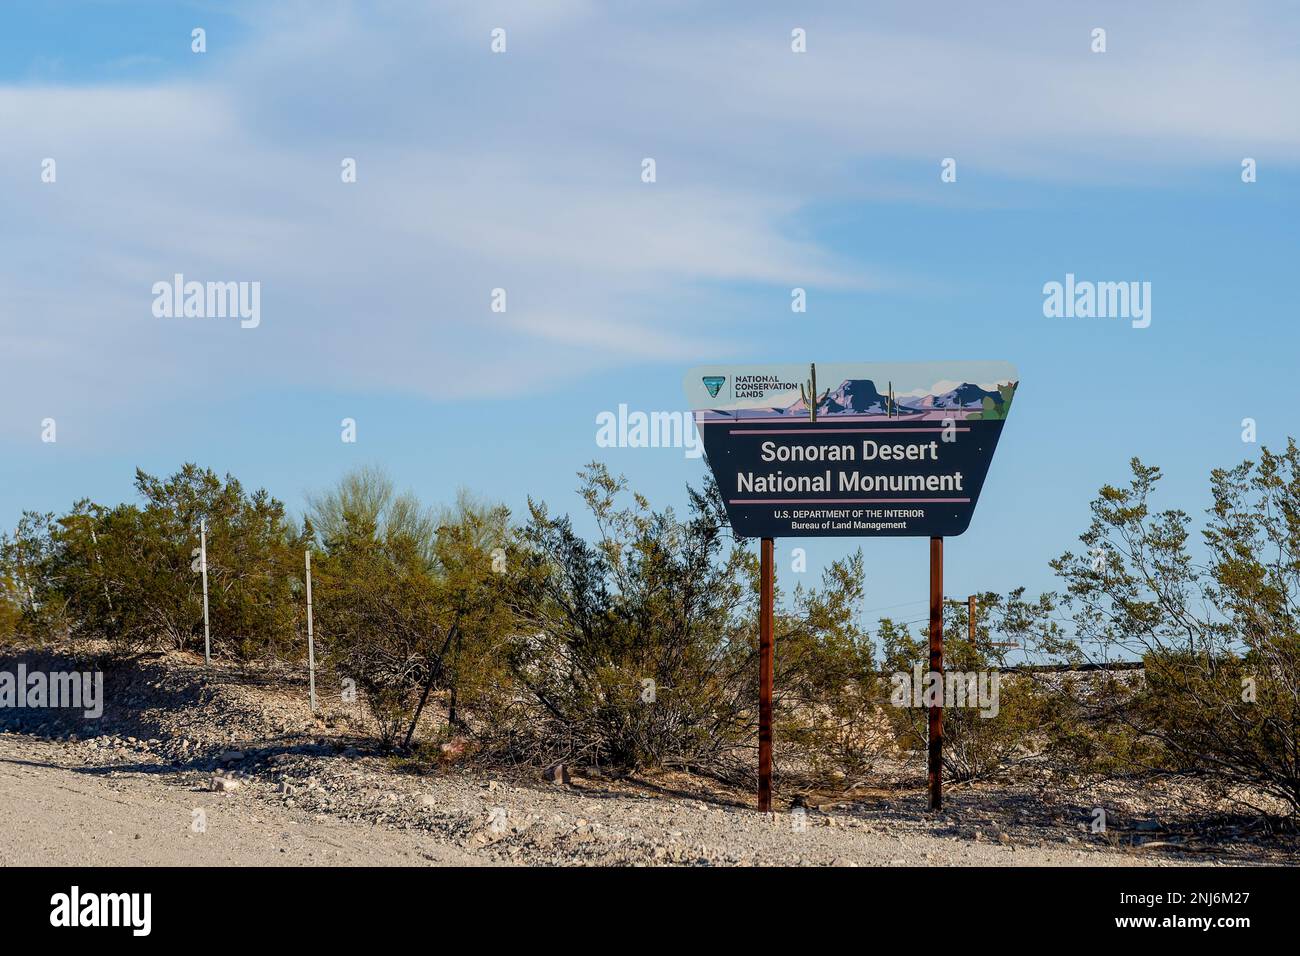 Gila Bend, Arizona - Nov. 28, 2022: The Sonoran Desert National Monument was created by Presidential proclamation on January 17, 2001 by President Cli Stock Photo